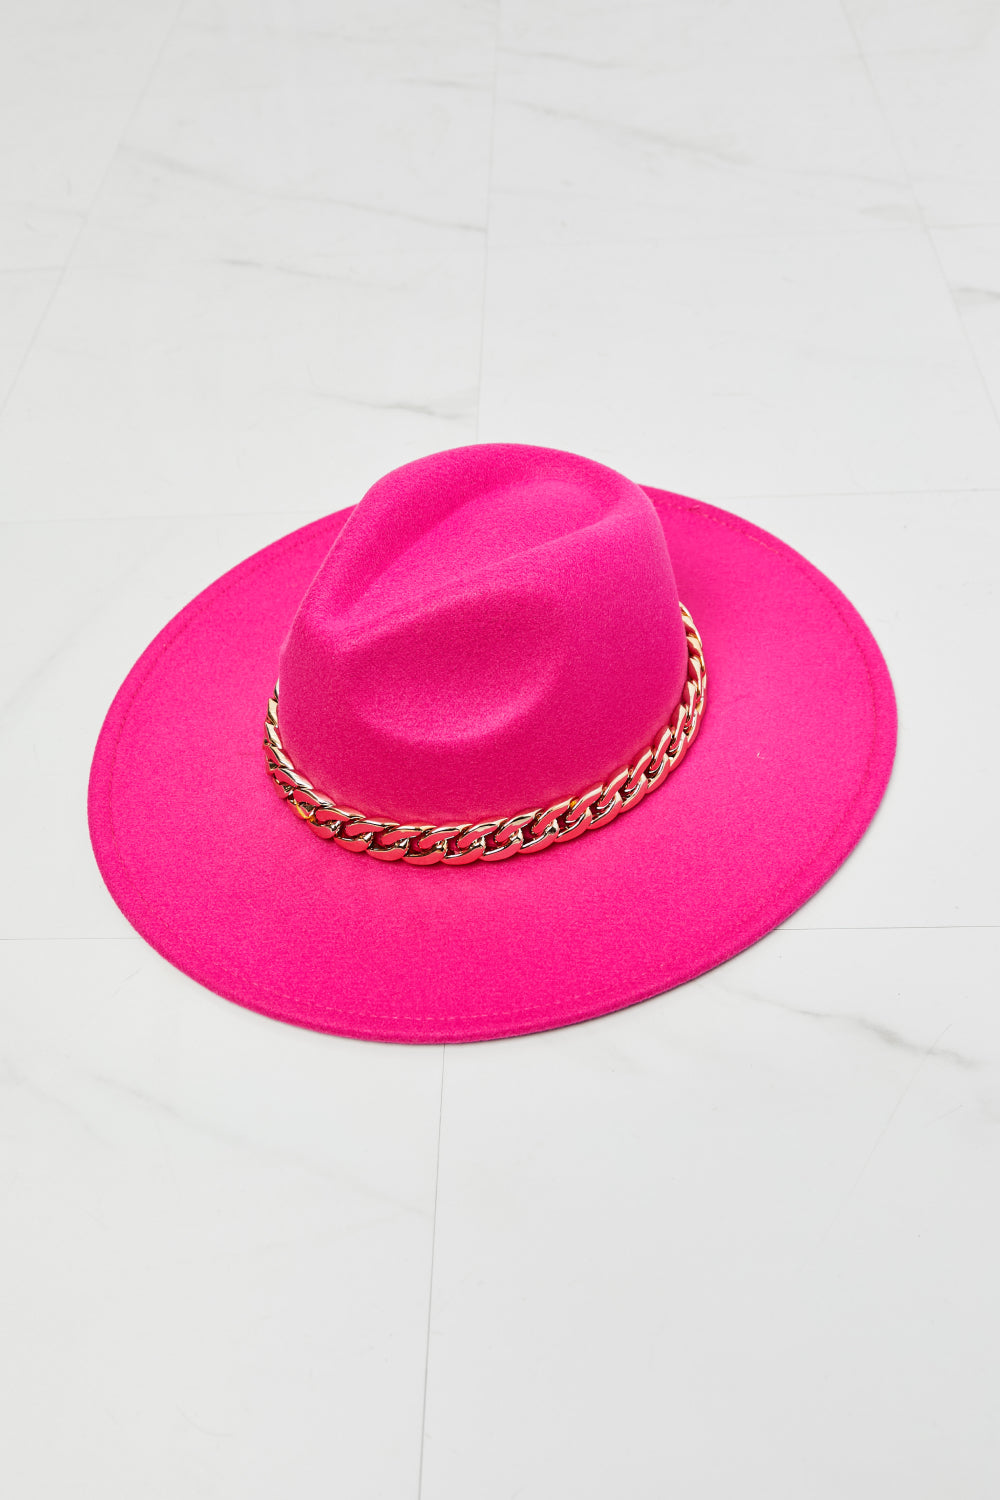 Fame Keep Your Promise Fedora Hat in Pink - Online Only